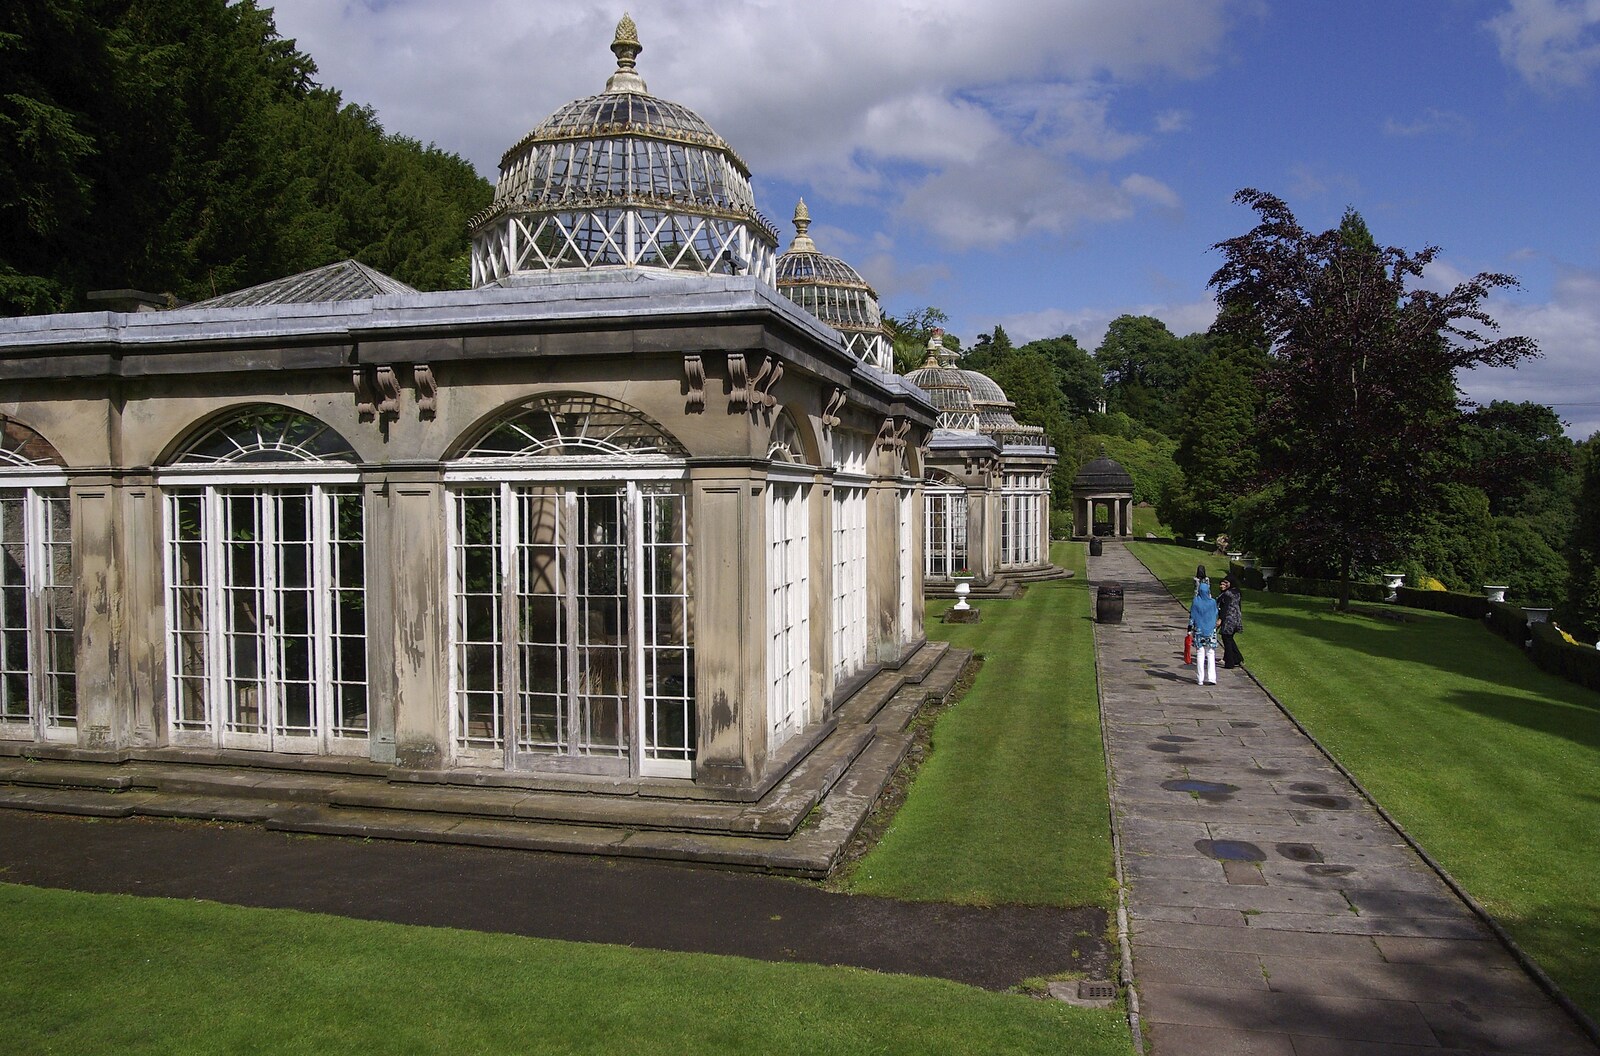 Qualcomm at Alton Towers, Staffordshire - 29th June 2008: The Alton Towers orangery